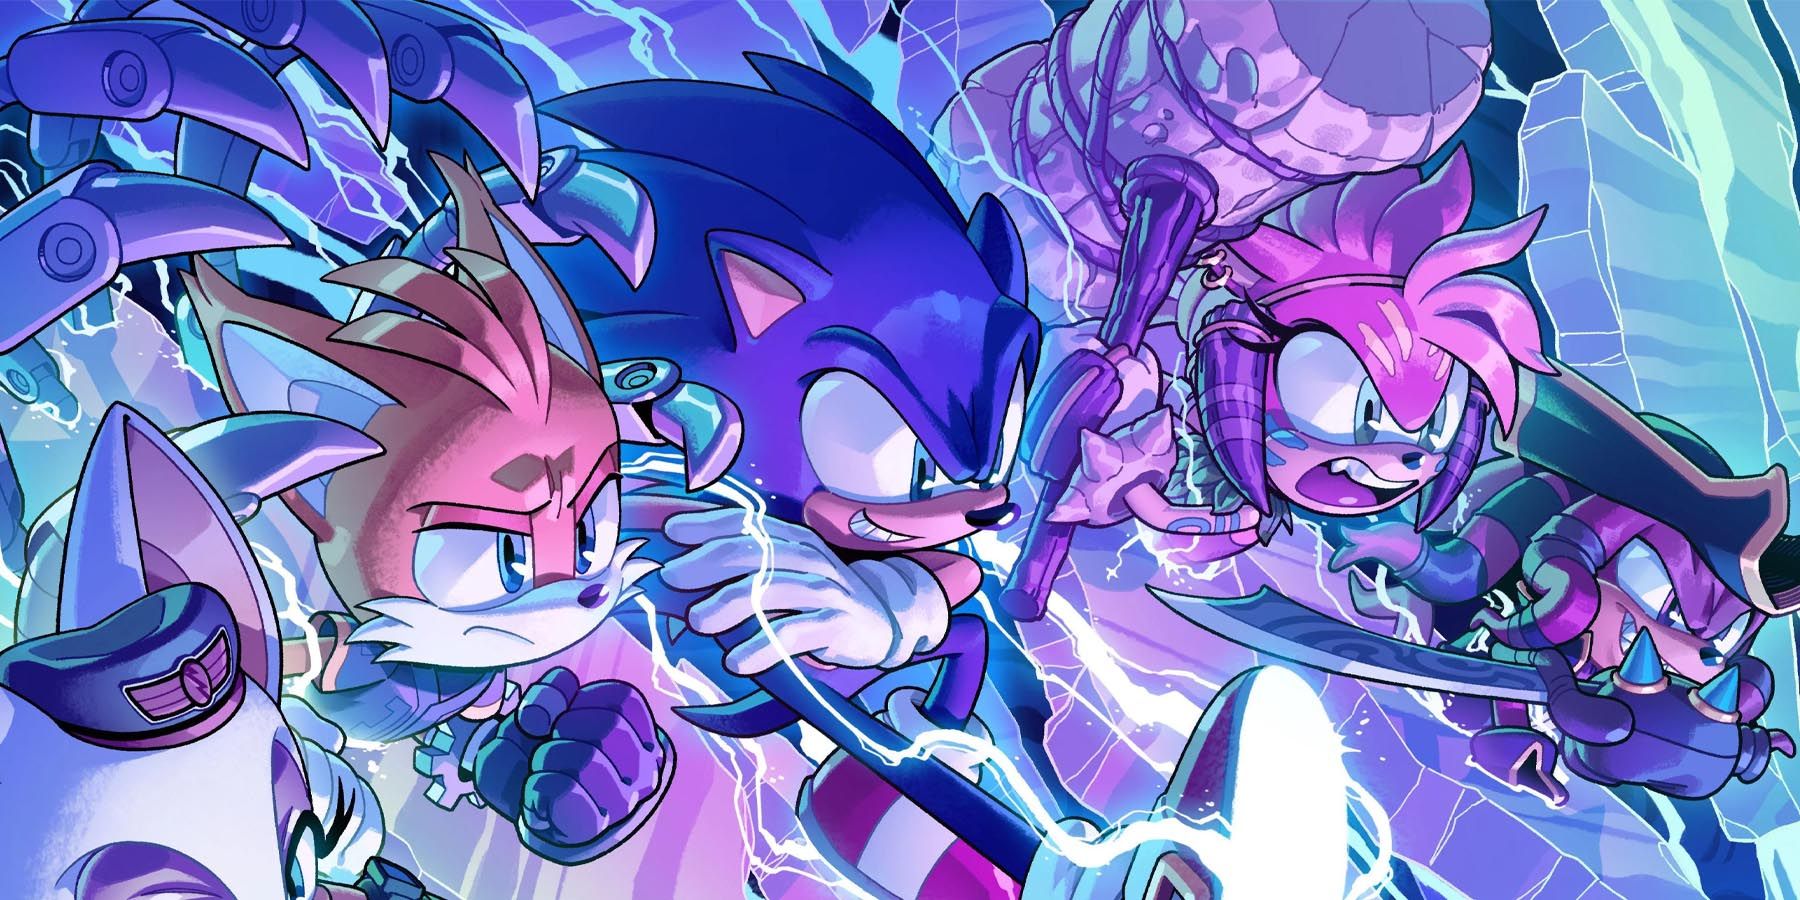 Sonic Prime's Shatterverse Comes to Life in These First-Look Images